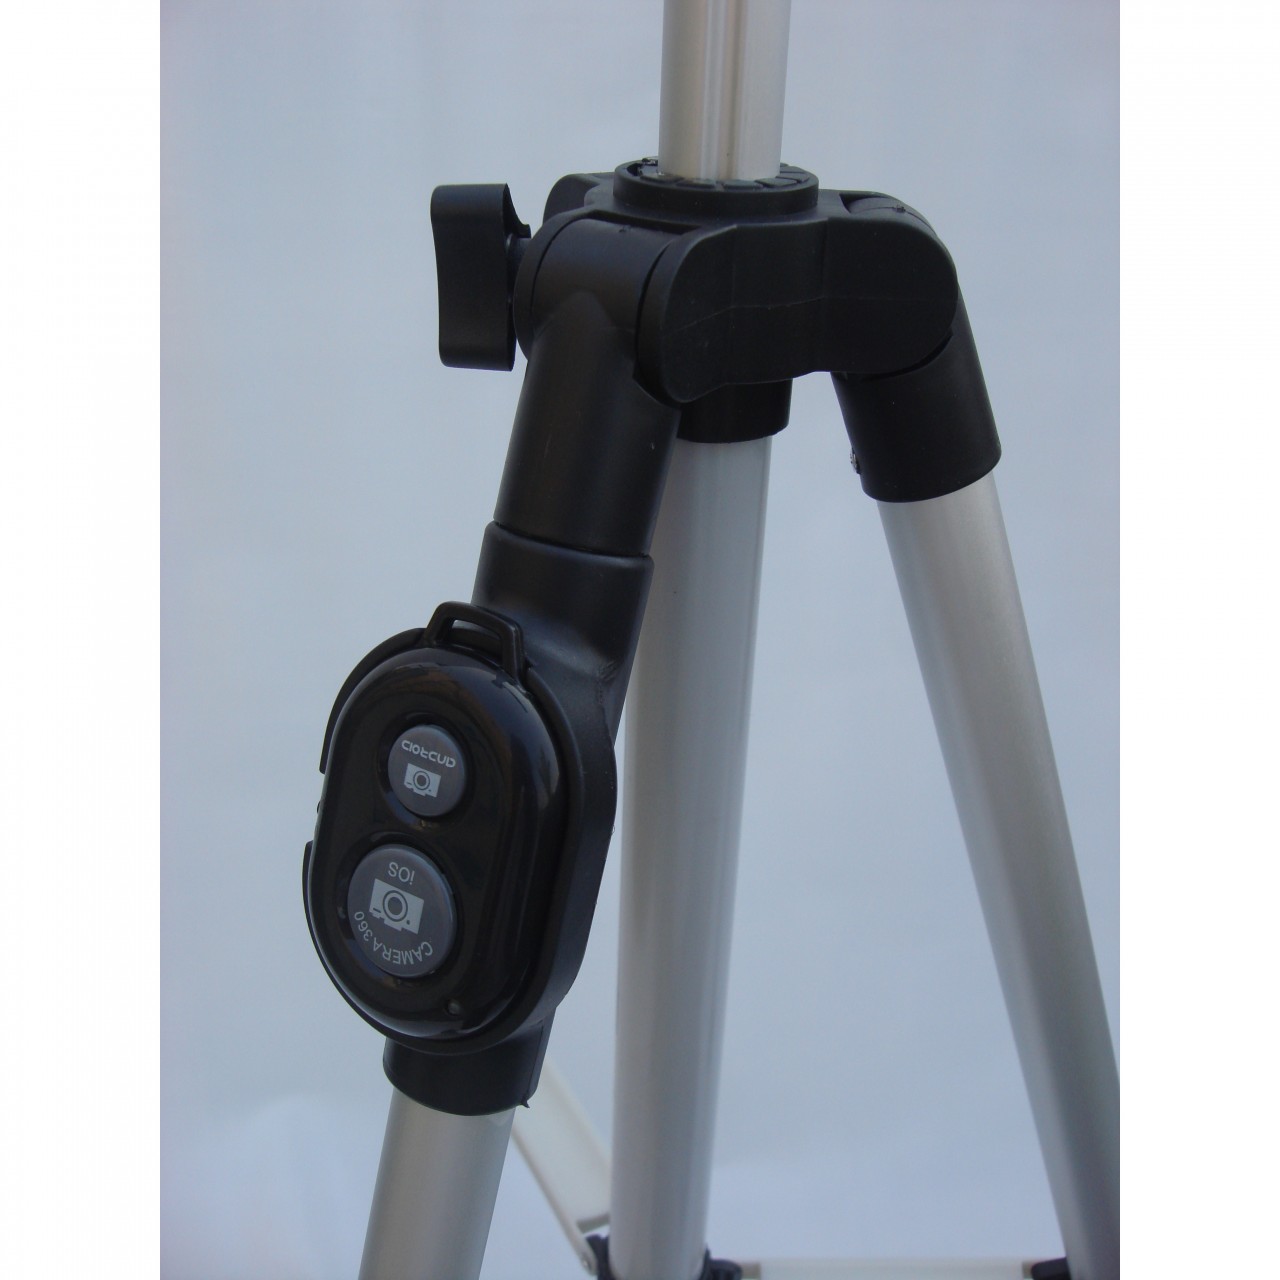 3888 Tripod stand with remote for mobile and camera both (Original pictures shown)